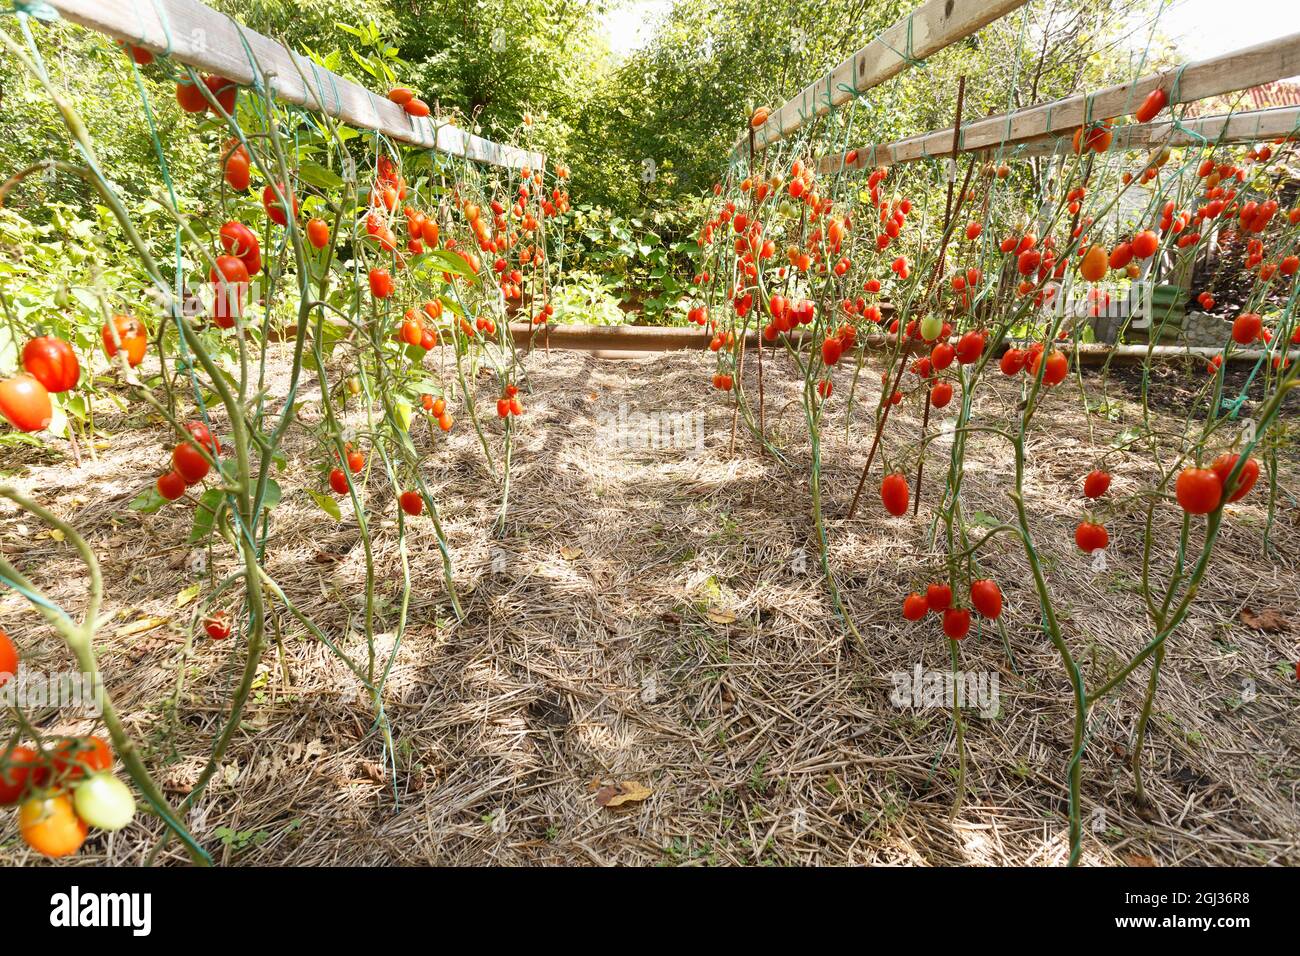 Ripe tomatoes growing on a branch in the garden Stock Photo